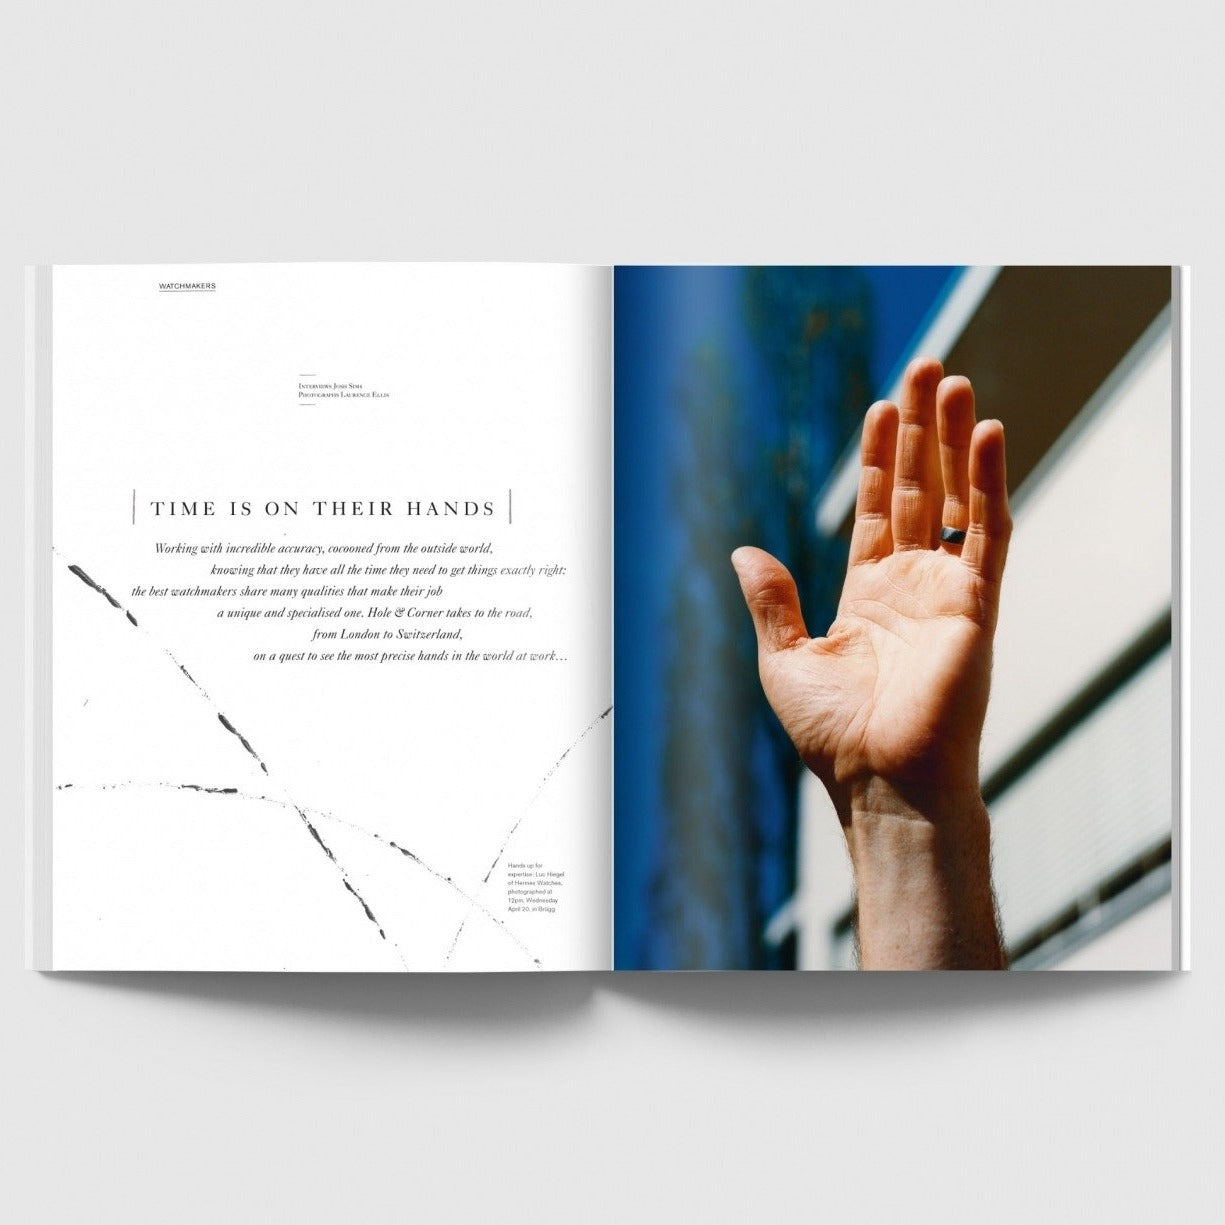 Issue 09: Movement